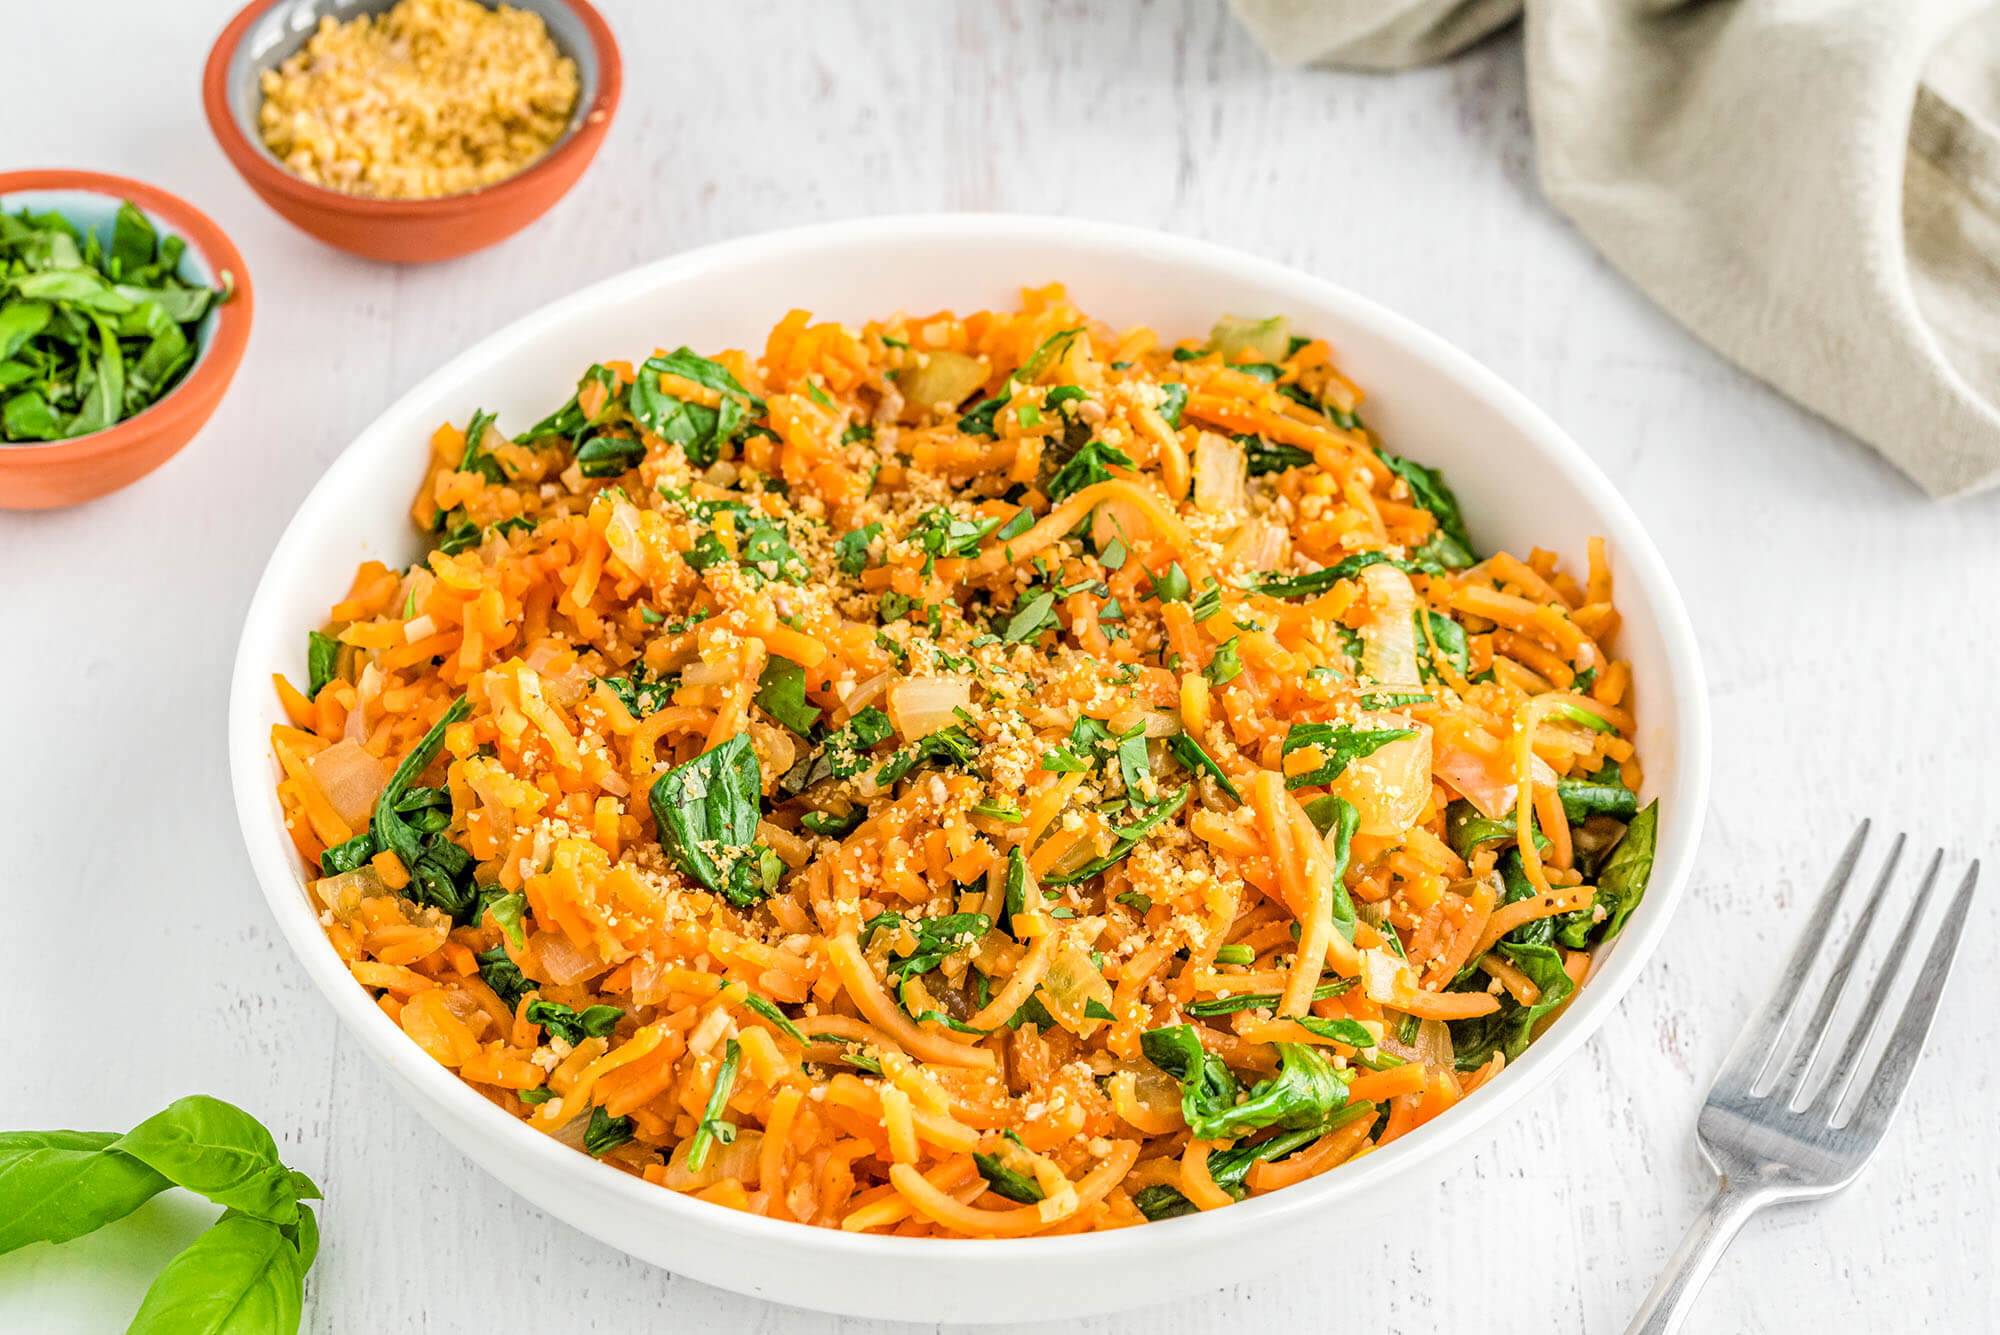 https://foodrevolution.org/wp-content/uploads/Sweet-Potato-Noodles-with-Spinach-4.jpg